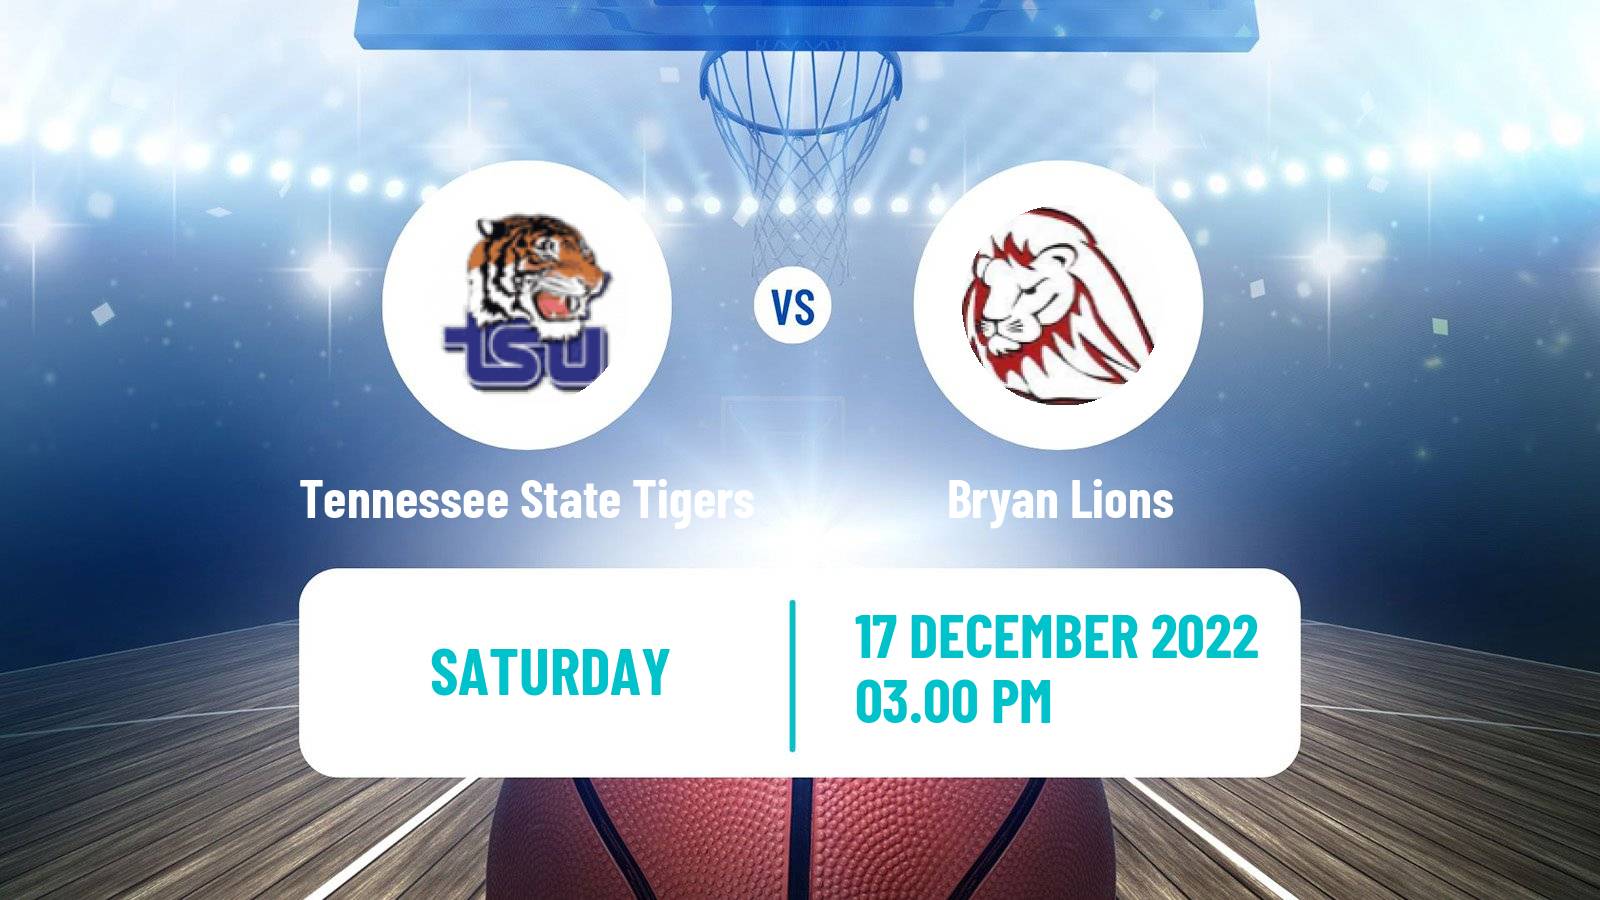 Basketball NCAA College Basketball Tennessee State Tigers - Bryan Lions